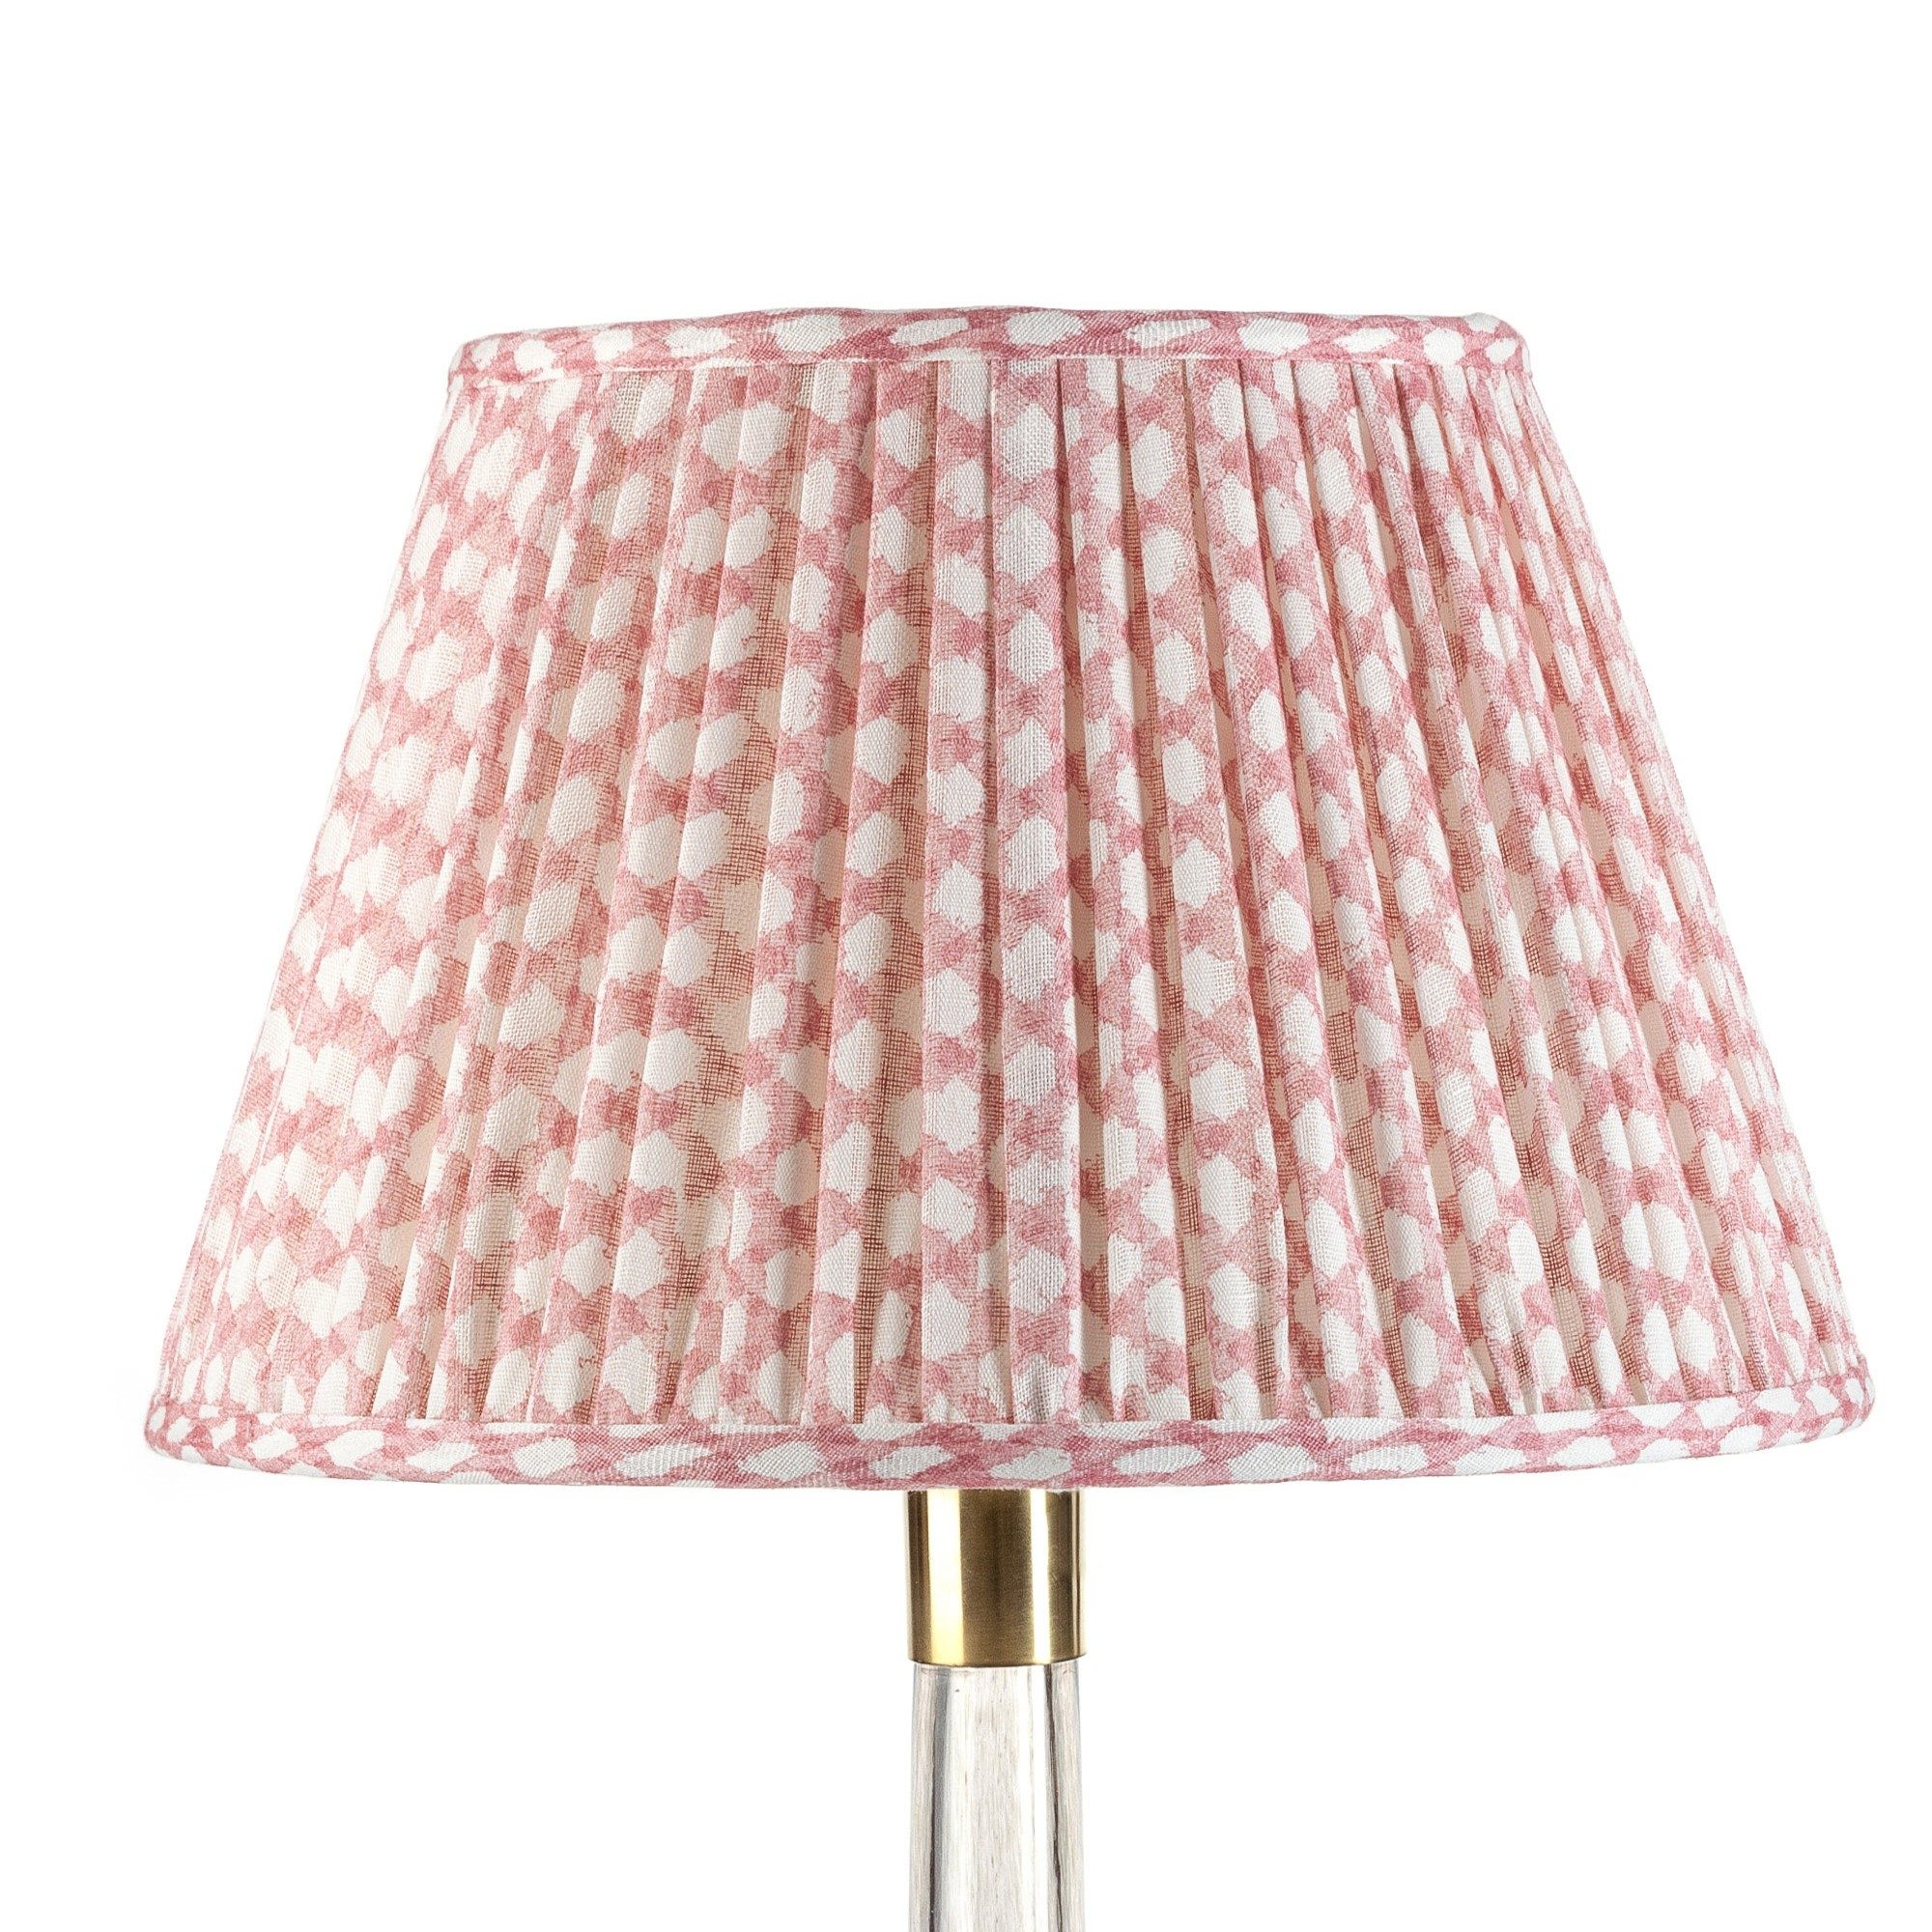 Empire Gathered Lampshade in Pink Wicker 062-1